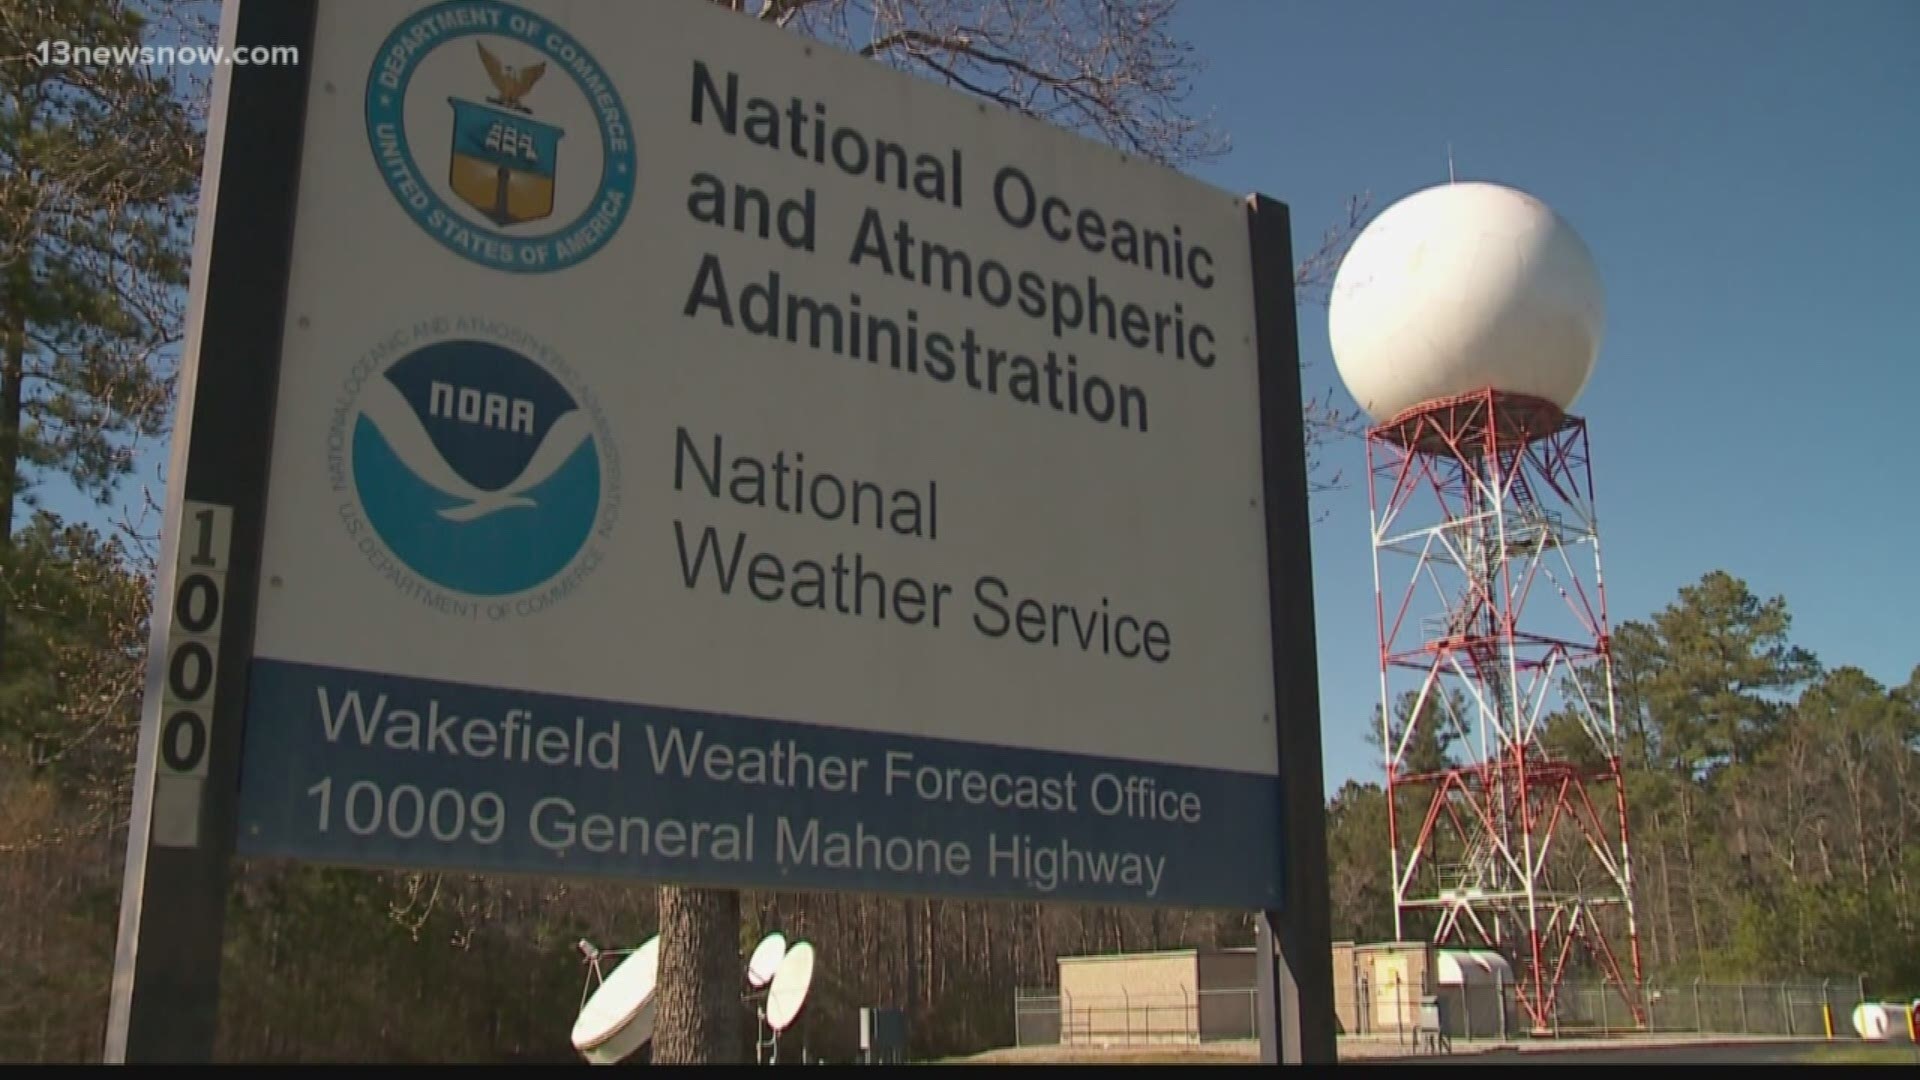 With the impending winter storm, the National Weather Service will remain staffed without pay as the shutdown continues, but one thing they can't do is train agencies and perform maintenance on field equipment.